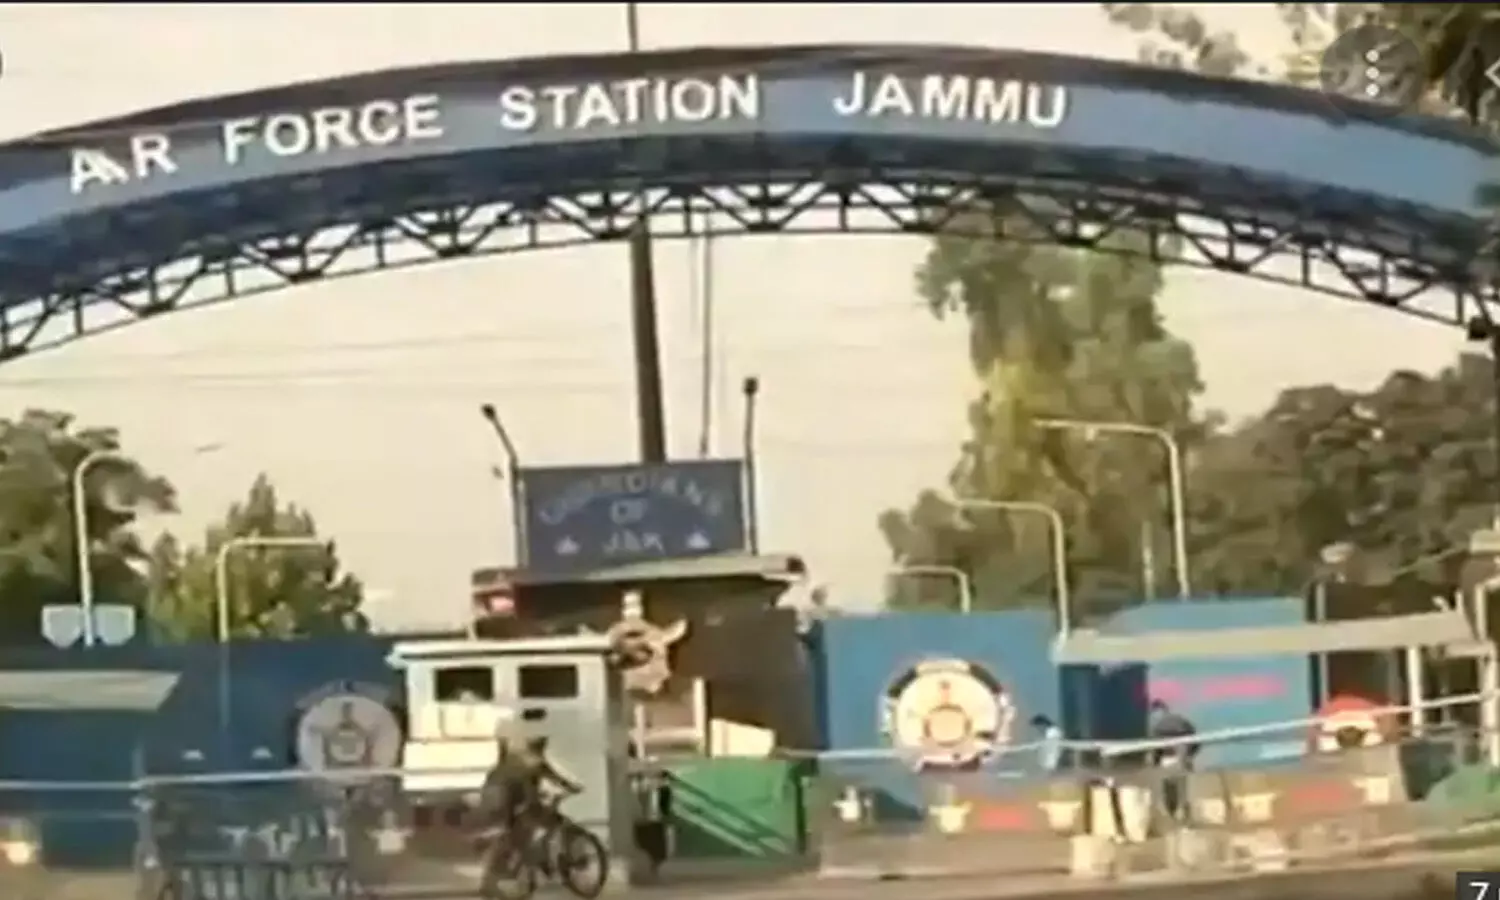 Jammu Airport: Two explosions heard inside technical area, No casualties